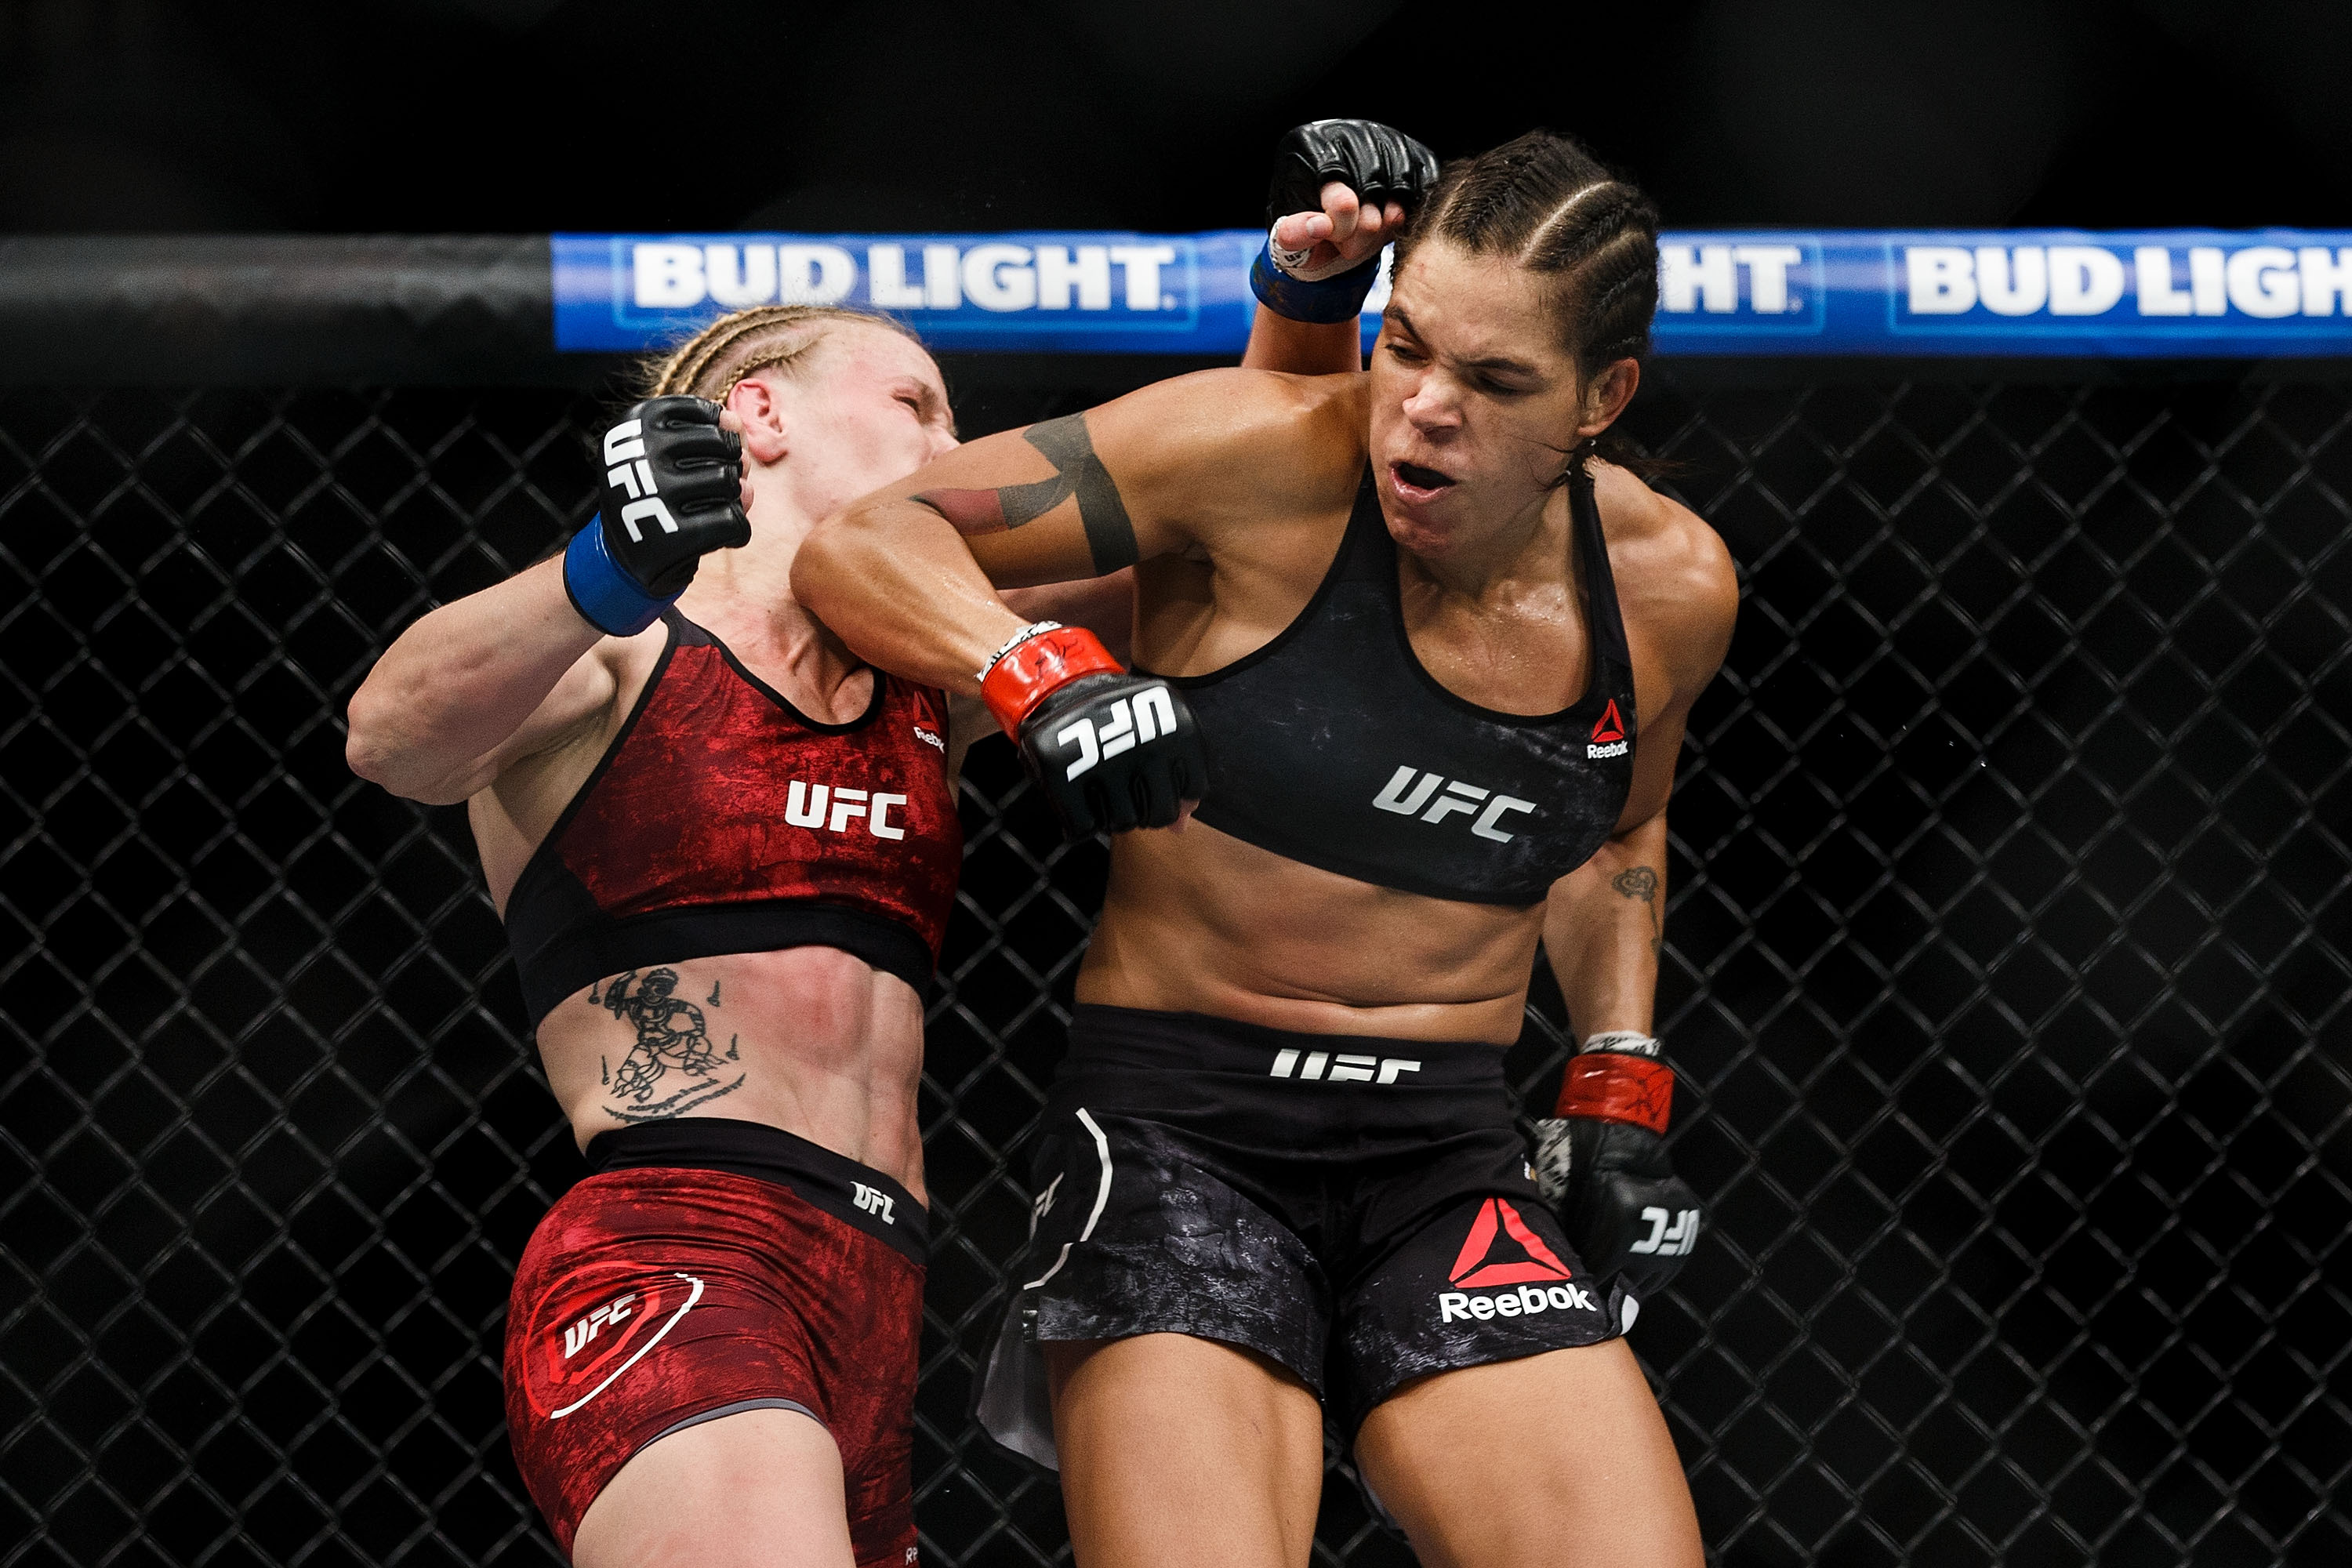 Top 10 Best Female UFC Fighters of all time - Ranked